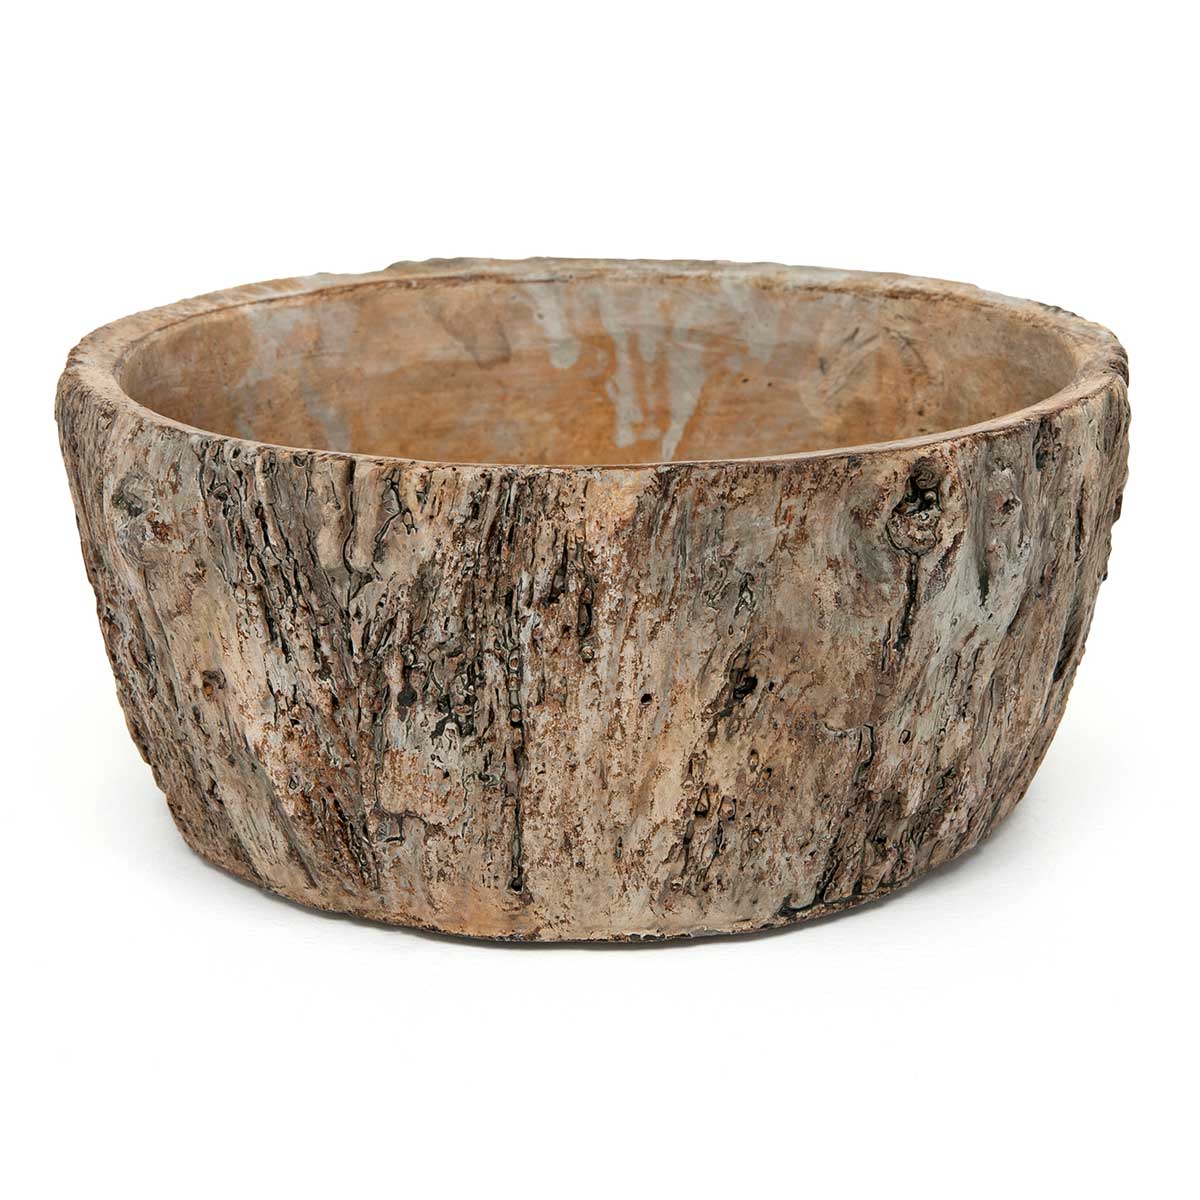 POT BARK BOWL 6.5IN X 3IN BROWN CONCRETE WITH WATERTIGHT GLAZE